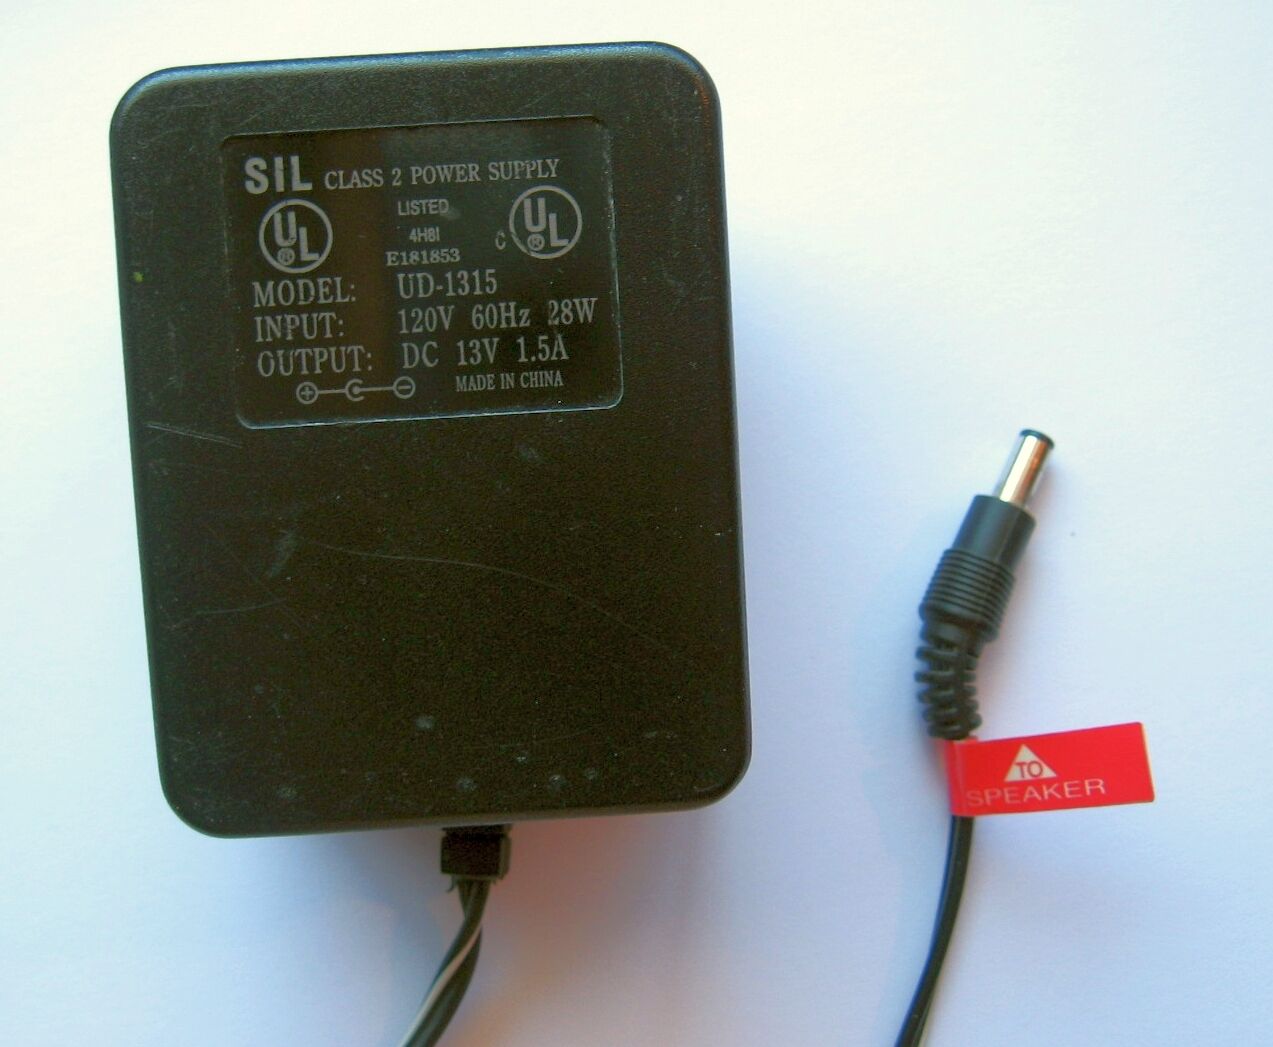 New 13V 1.5A SIL UD-1315 Class 2 Transformer Power Supply Ac Adapter